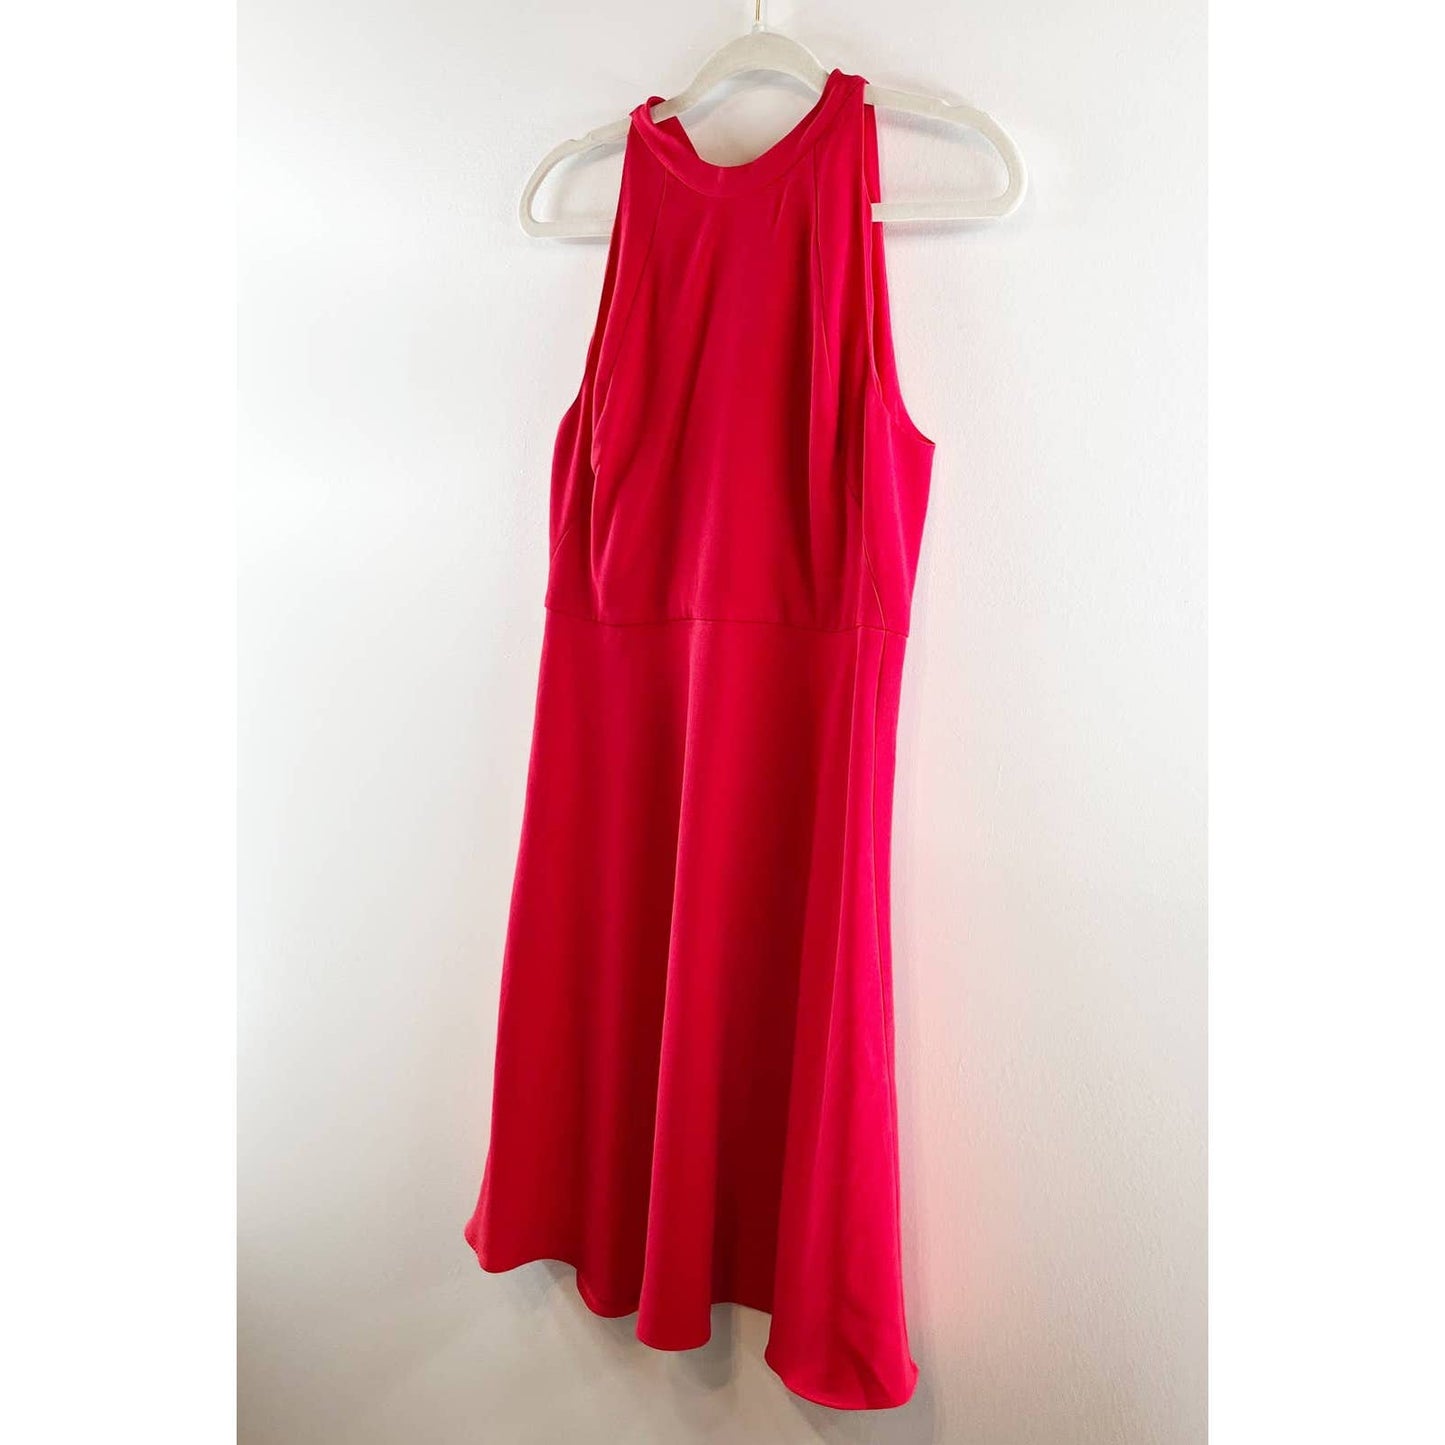 Aritzia Babaton Petros High Neck Tie Back A Line Flare Skirt Dress Red 8